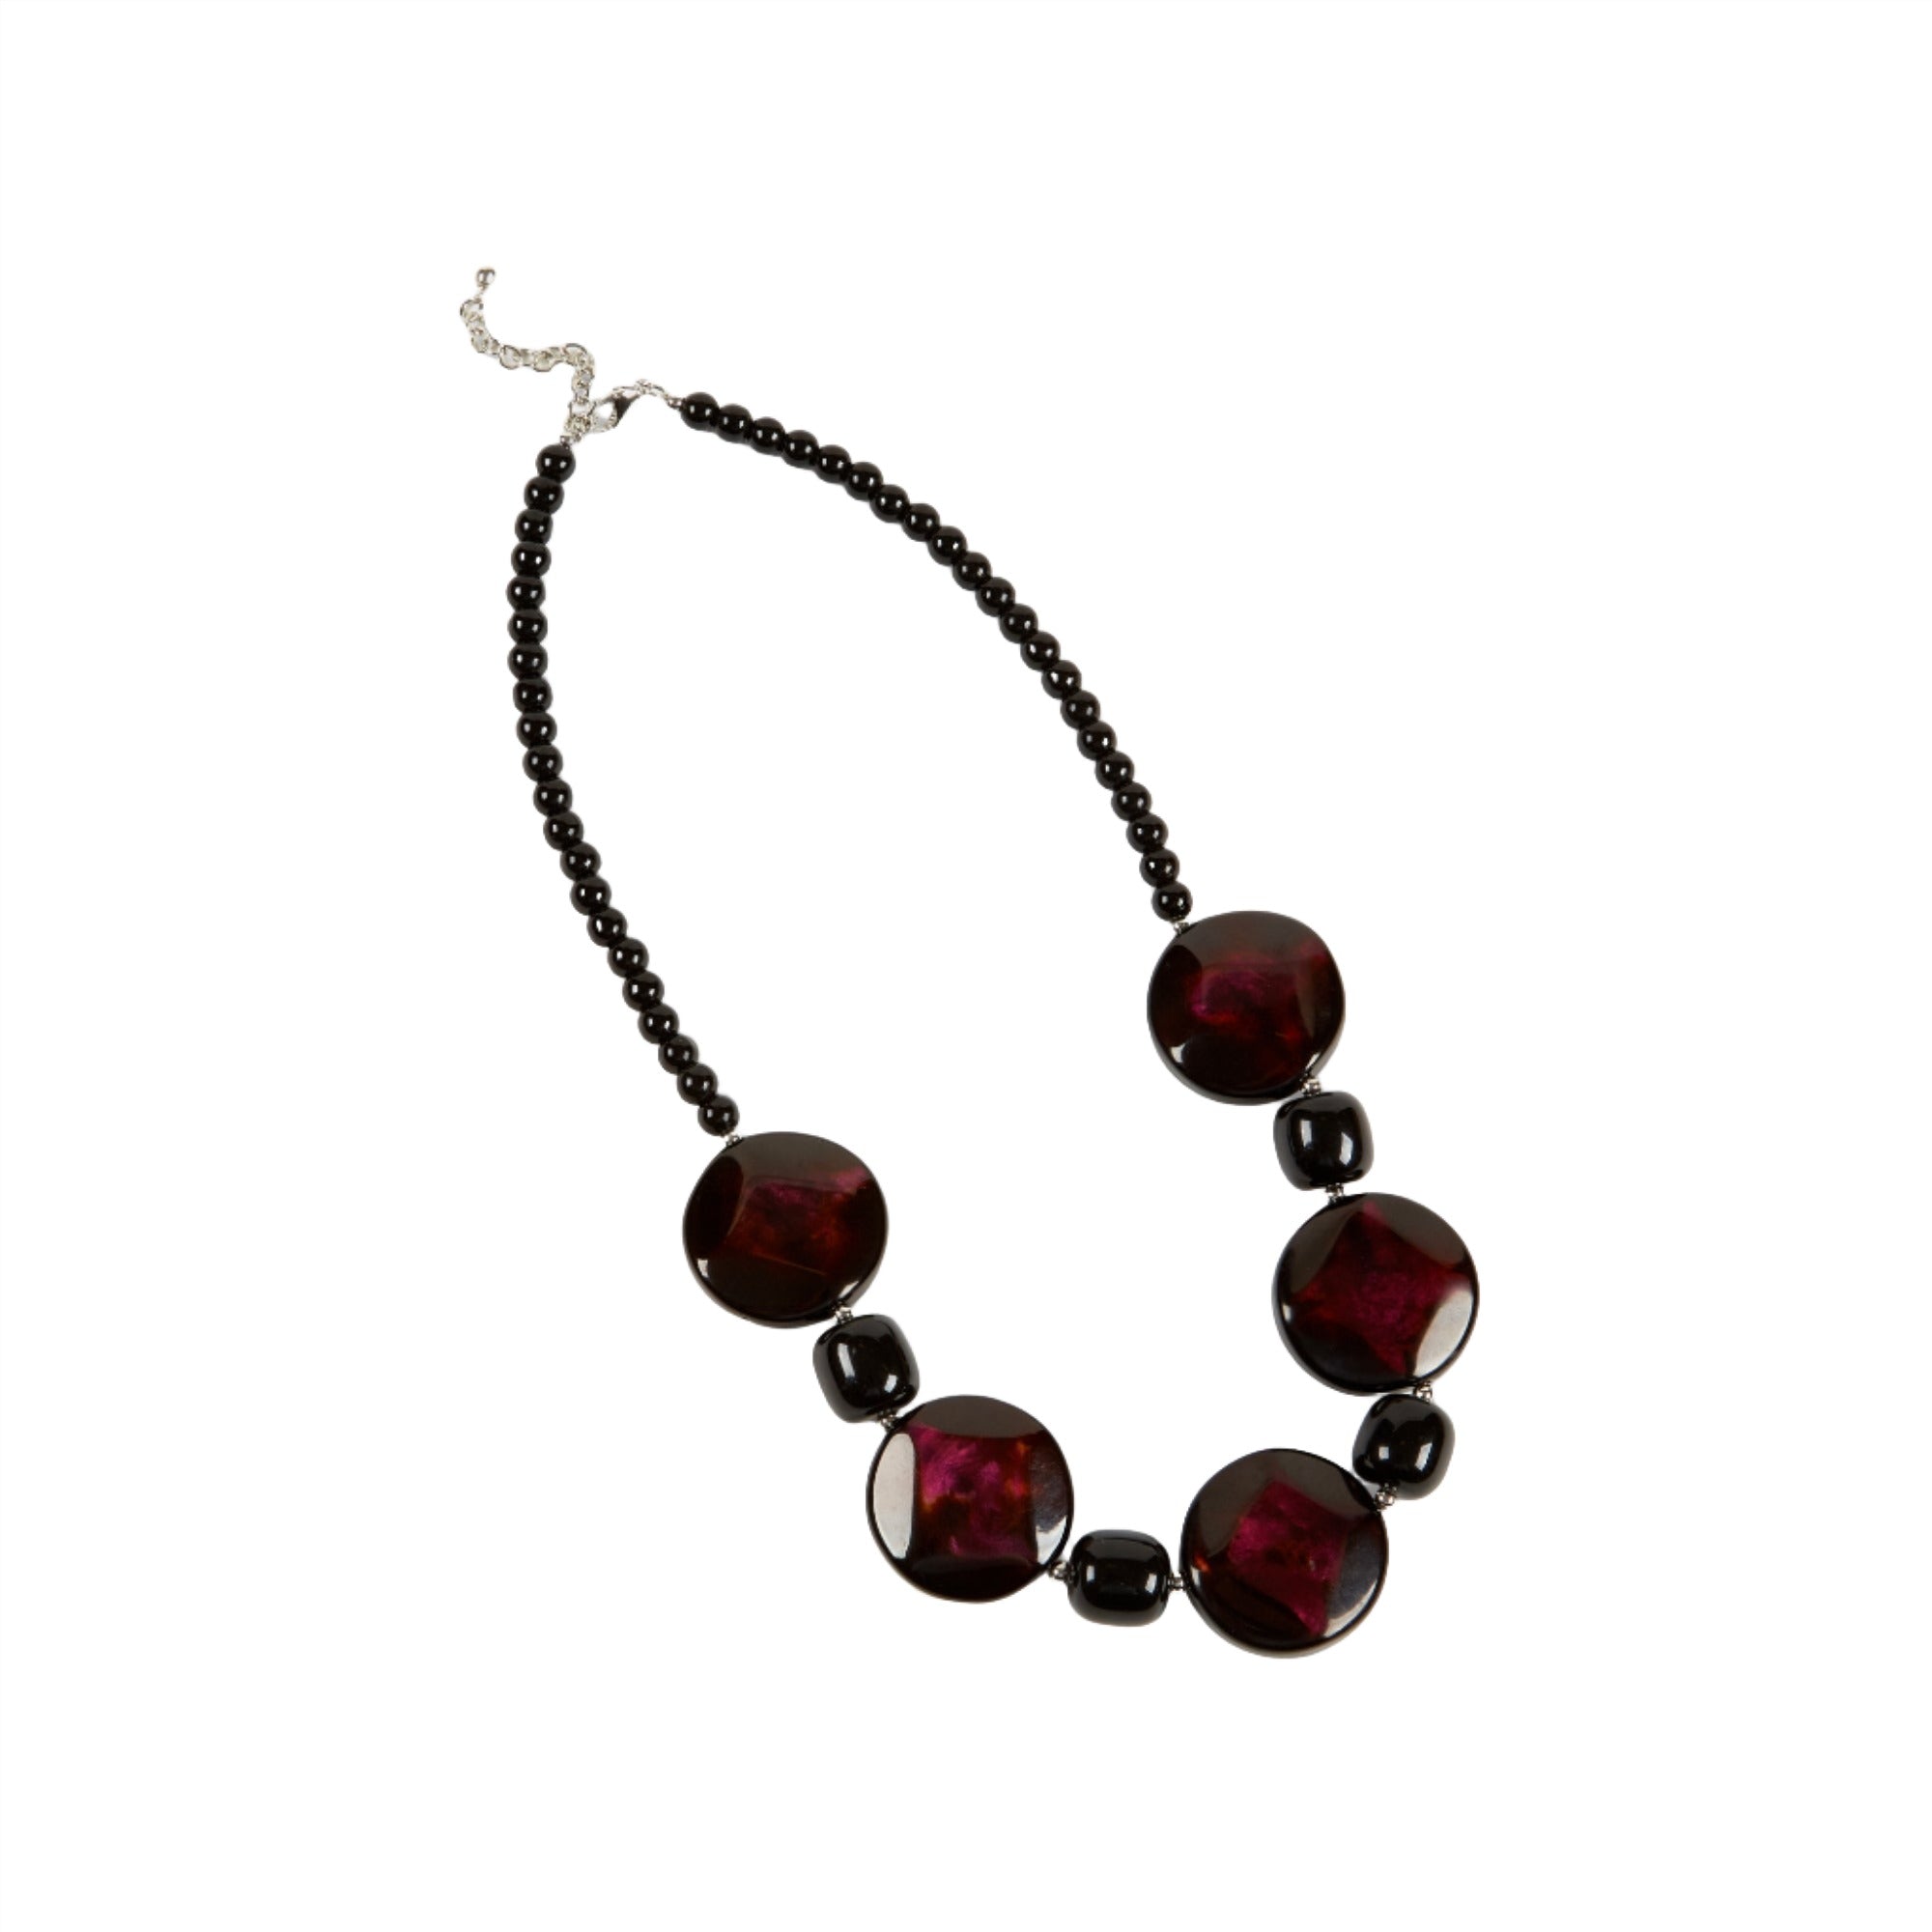 Dante Short Beaded Necklace Black and Red